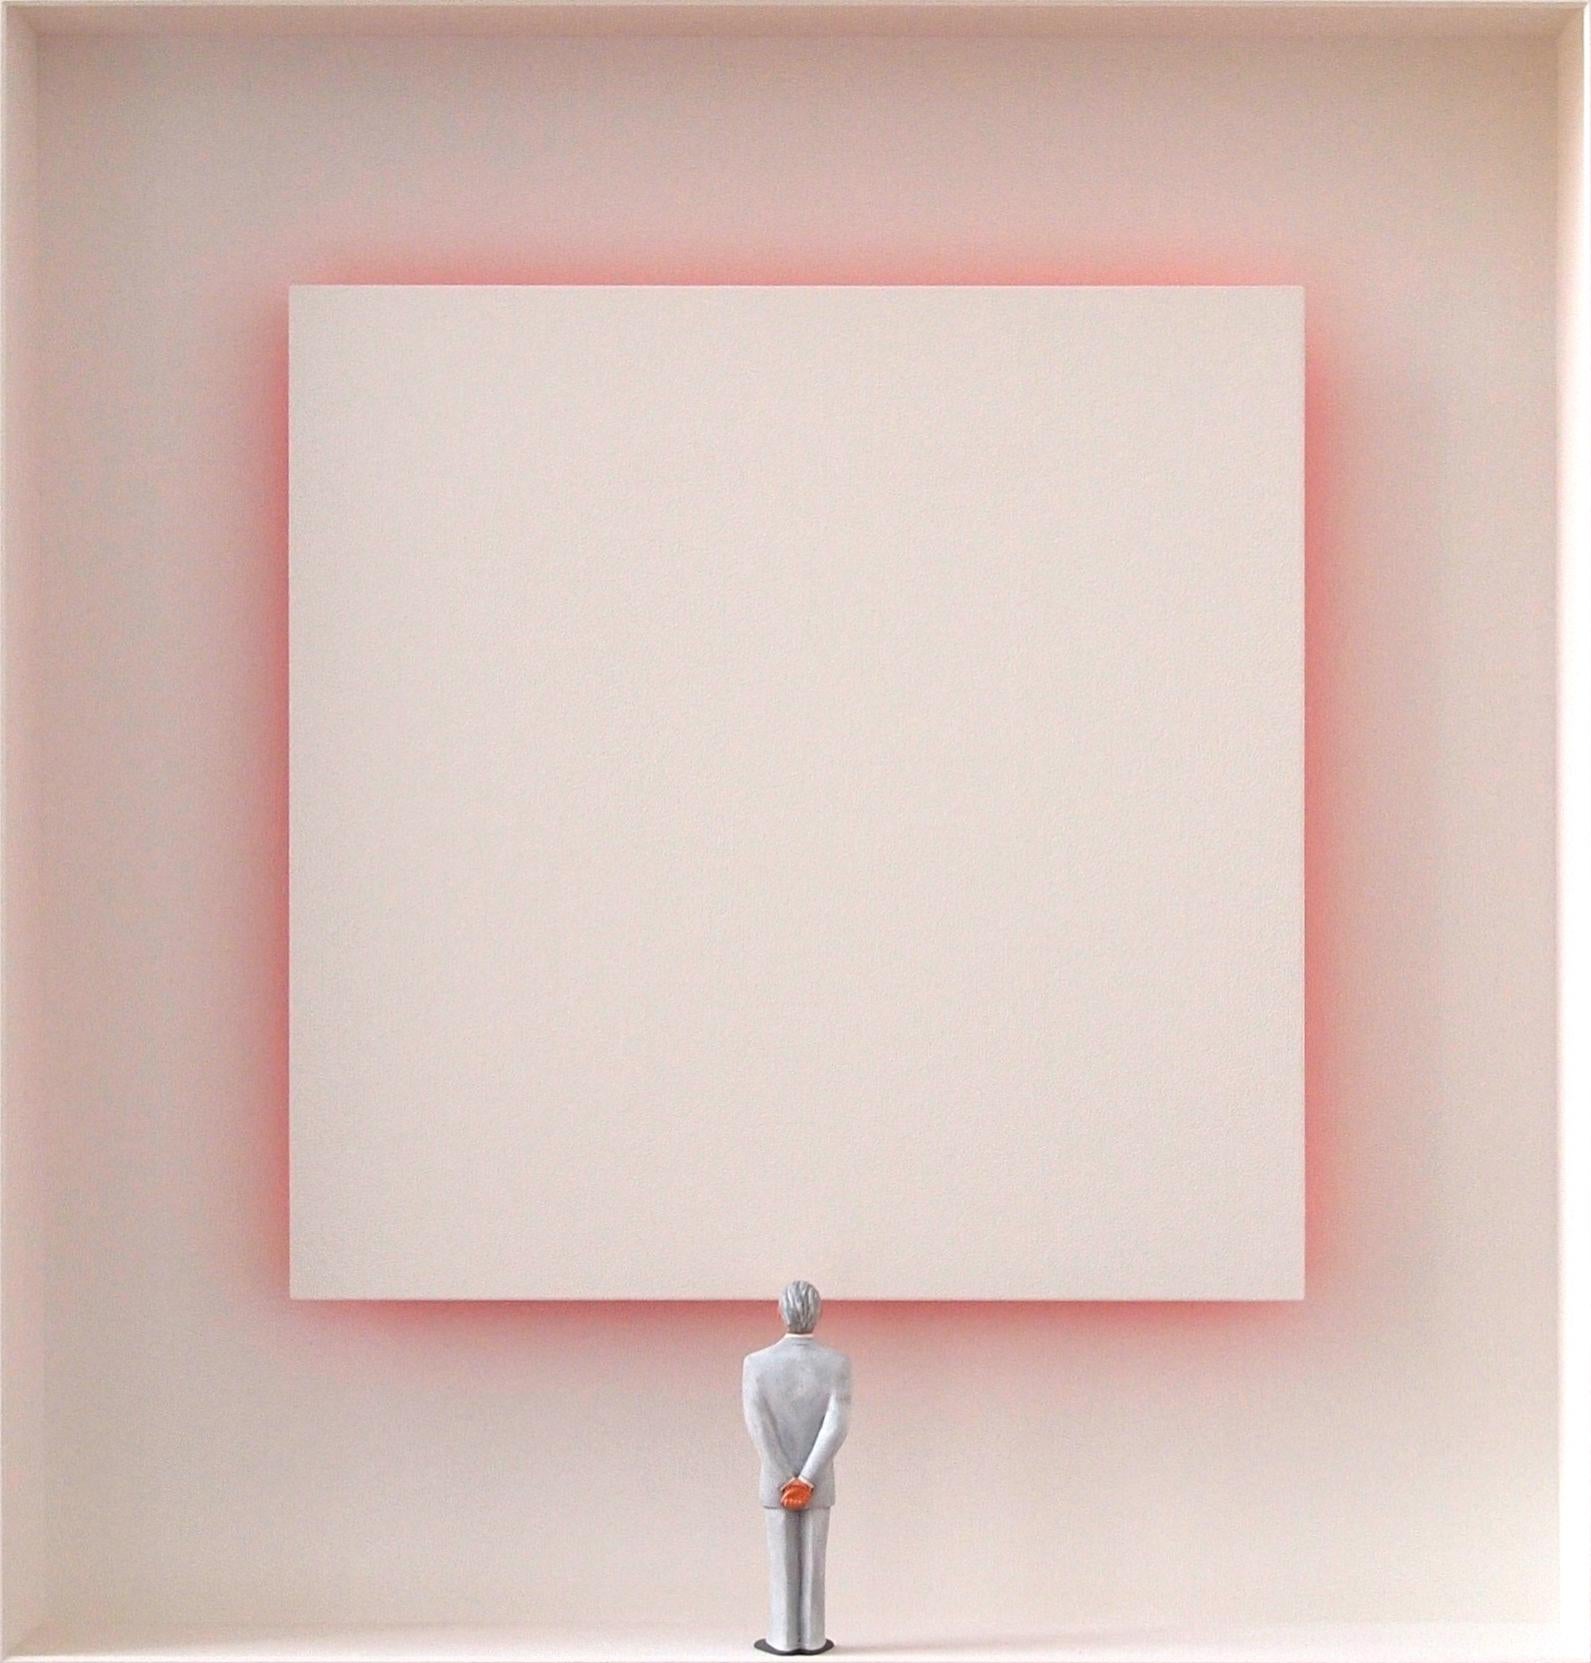 Great Reflection - contemporary minimalist artwork white canvas with reflection